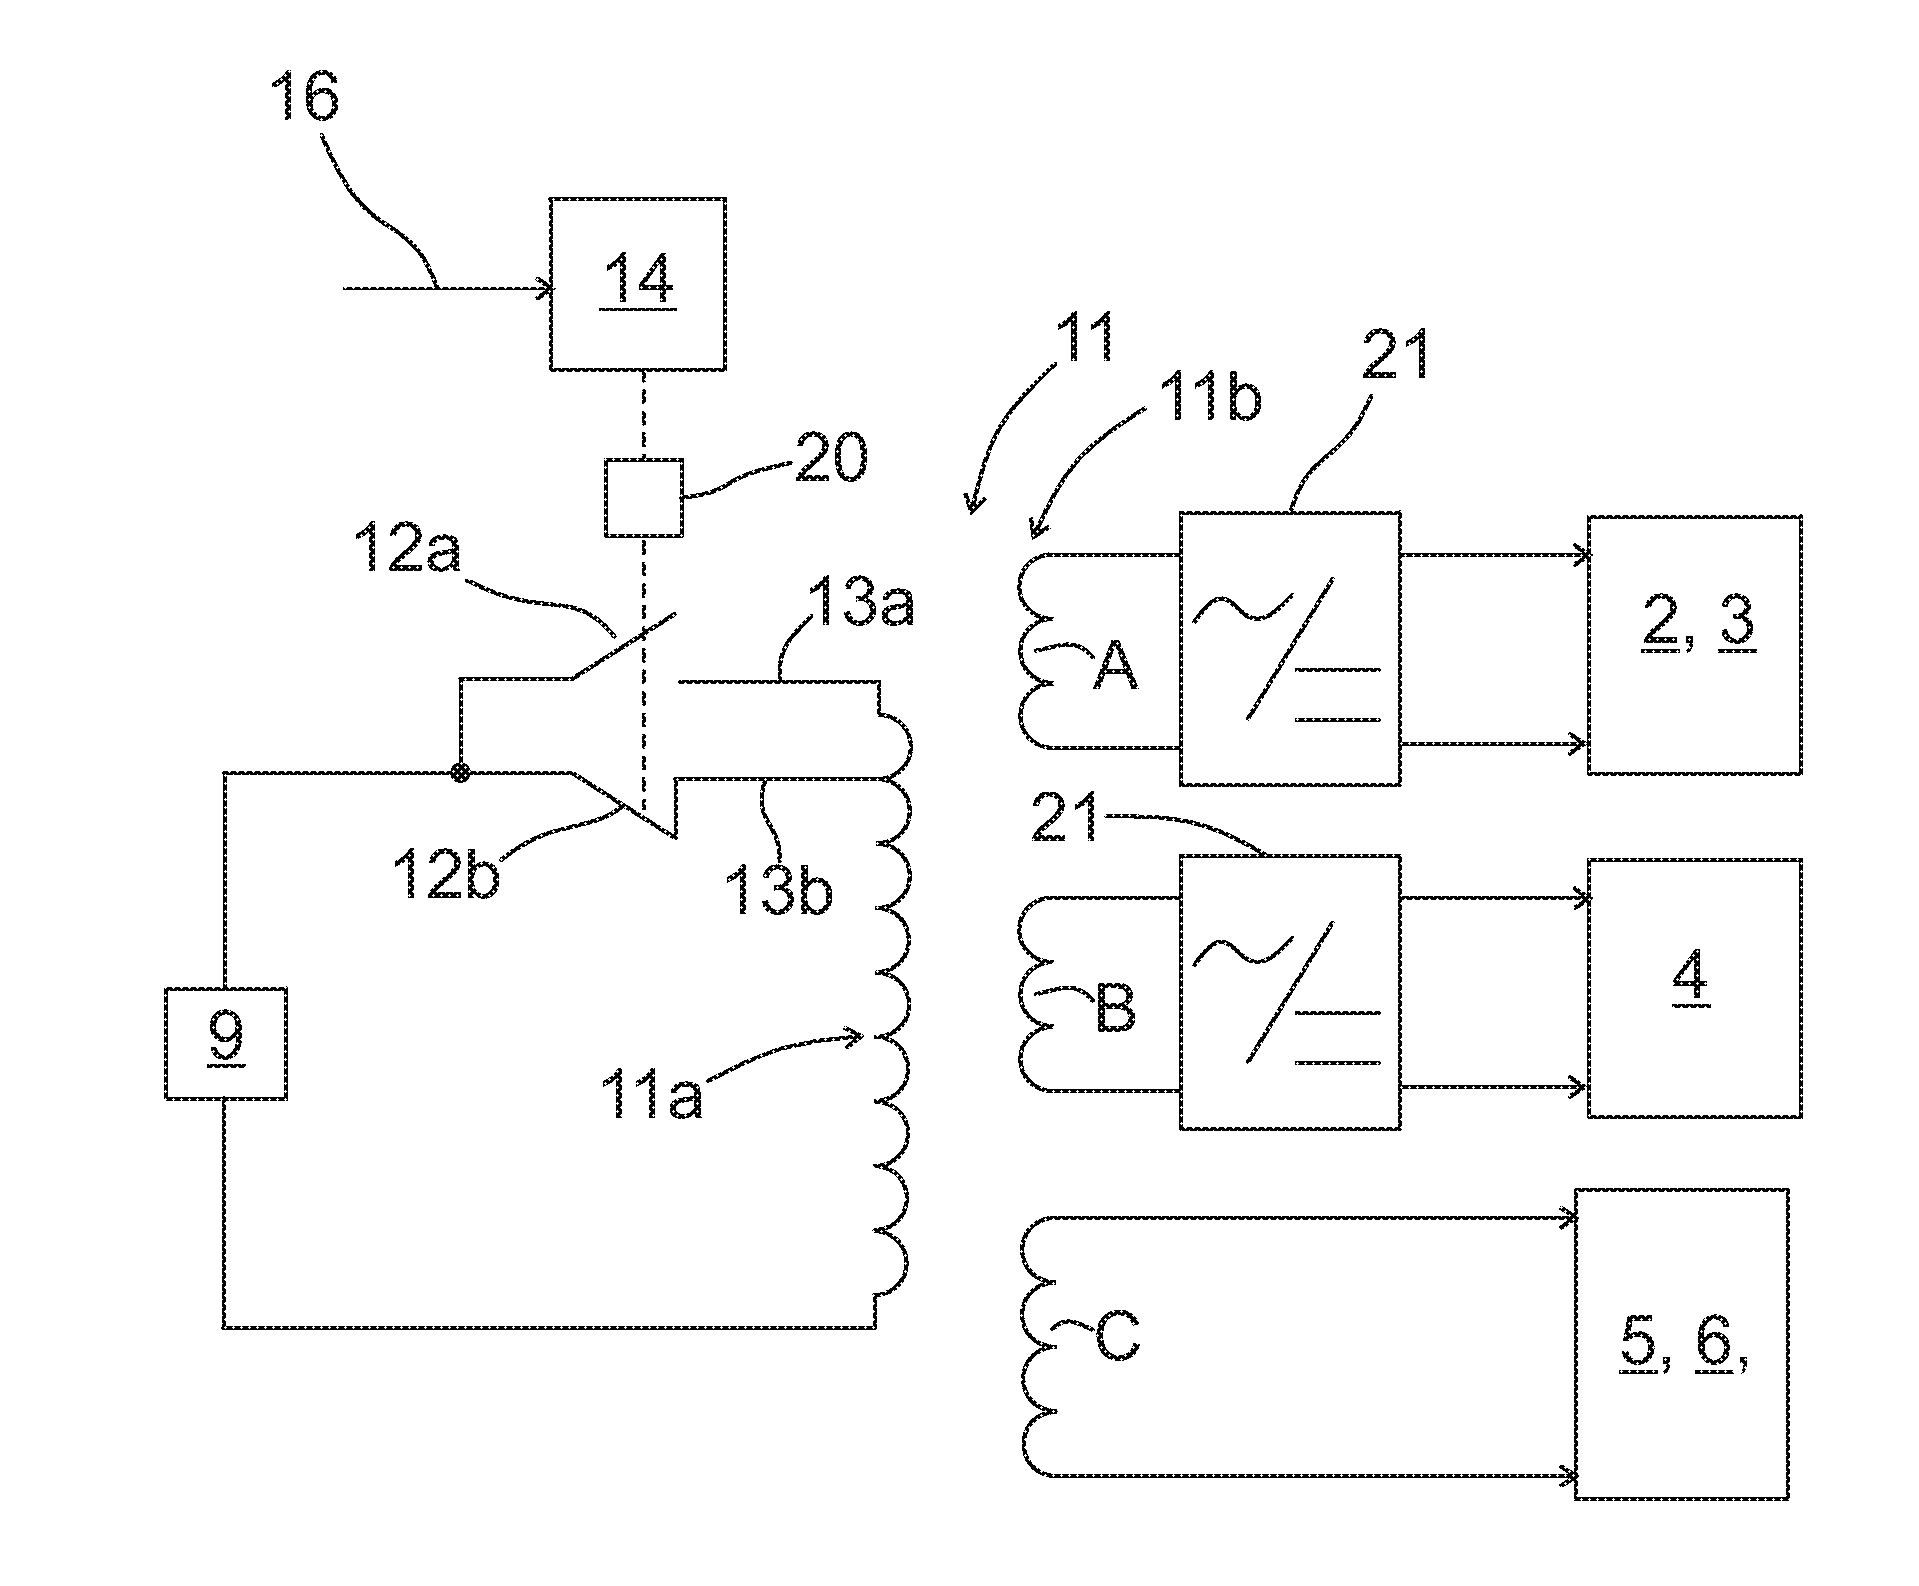 Electricity supply apparatus and an elevator system